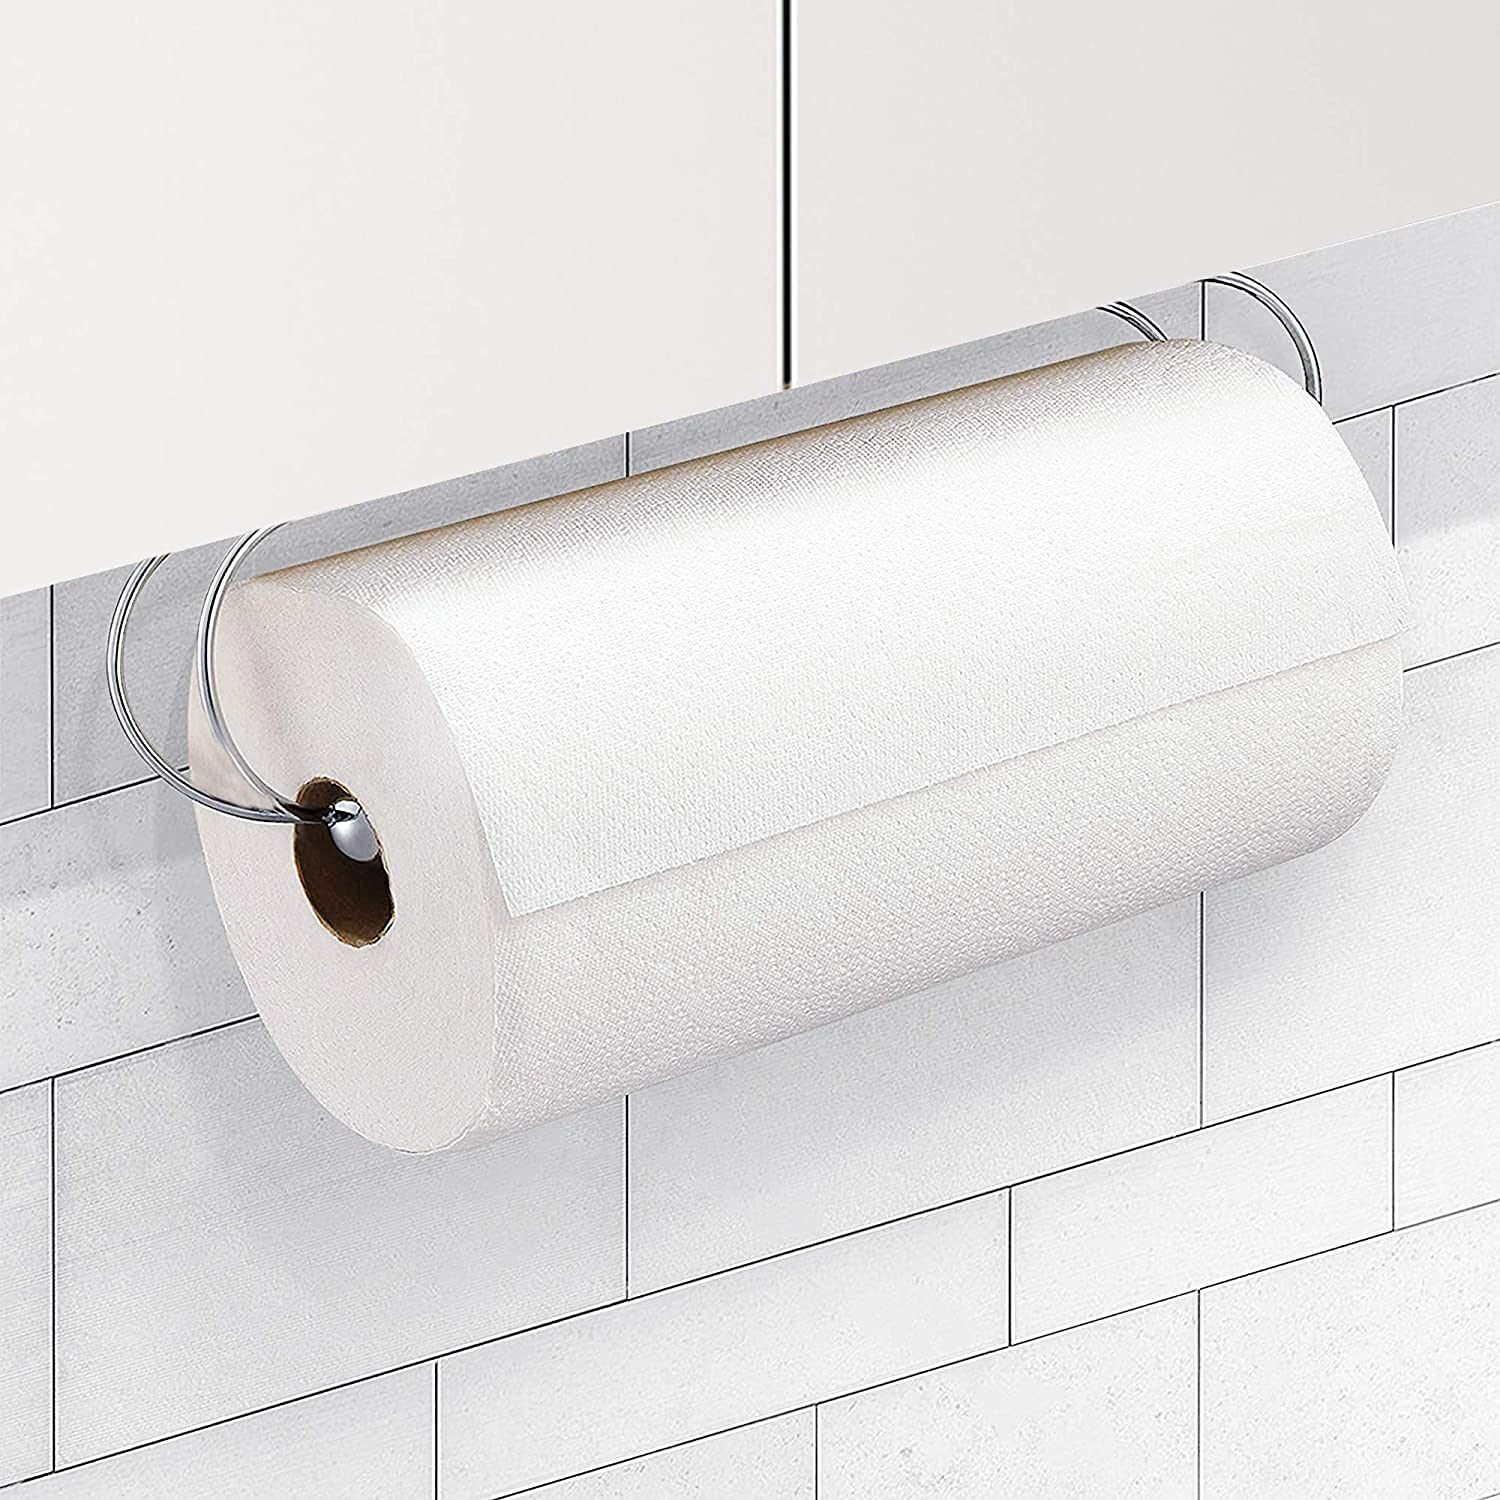 https://www.wideopencountry.com/wp-content/uploads/sites/4/eats/2021/03/CAXXA-Adhesive-Under-Cabinet-Paper-Towel-Holder-Dispenser-with-Screws-for-Kitchen-Utility-Room-Laundry-Pantry-Chrome1-Pack-.jpg?resize=1500%2C1500